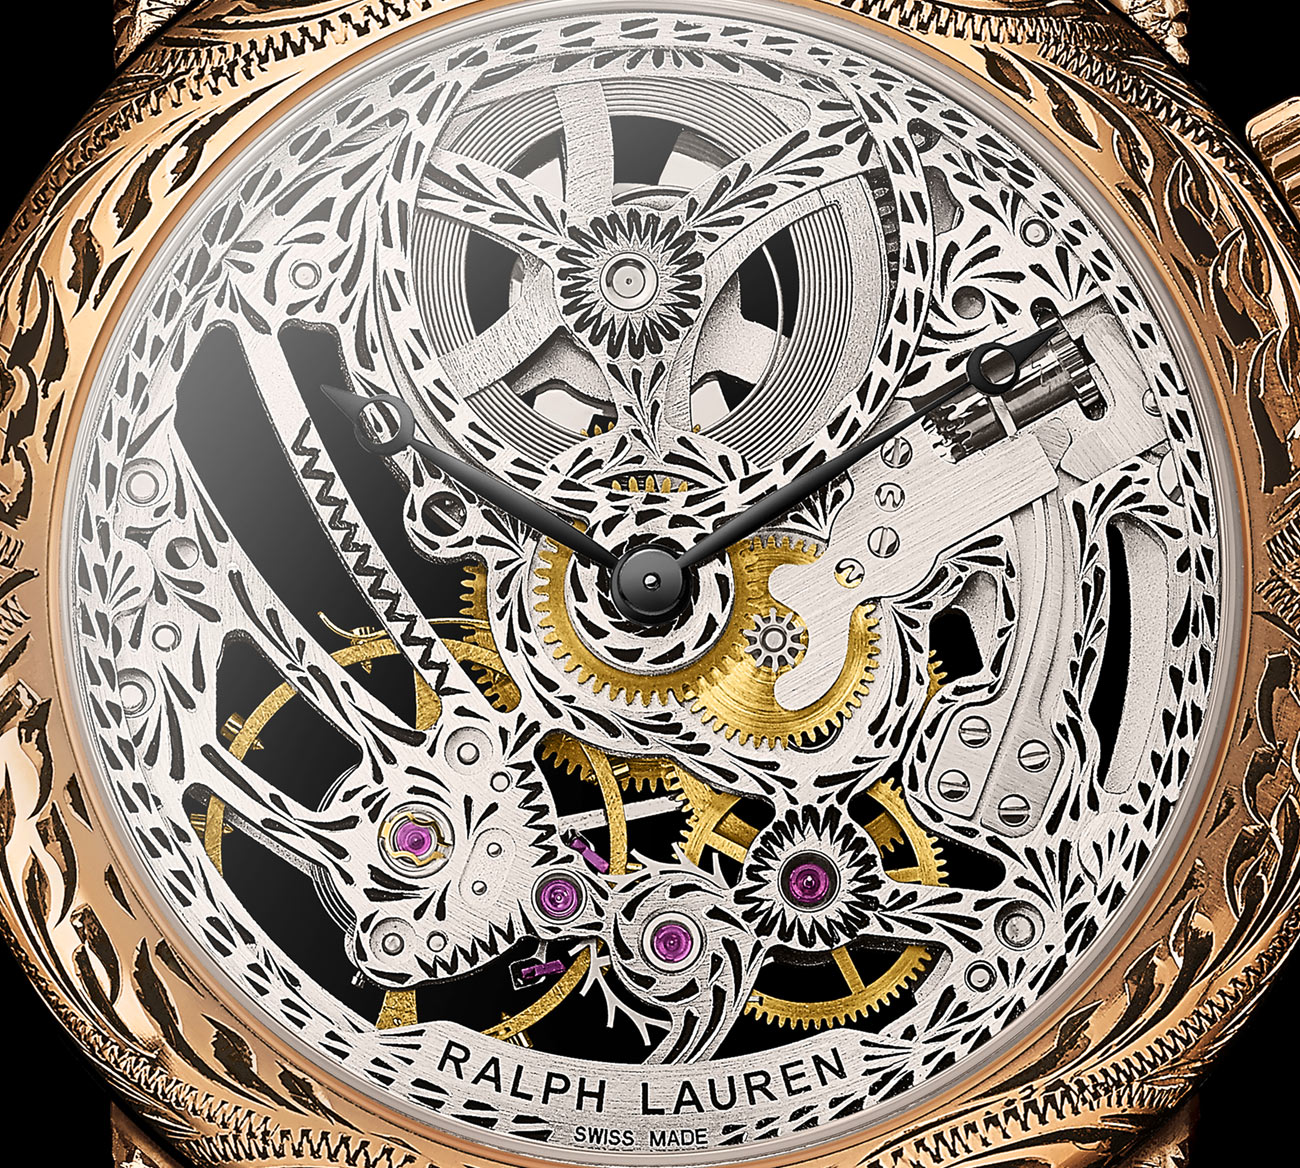 Go West: Ralph Lauren Introduces Limited-Edition American Western Watch  Collection | Skeleton watches, Watches for men, Vintage watches for men